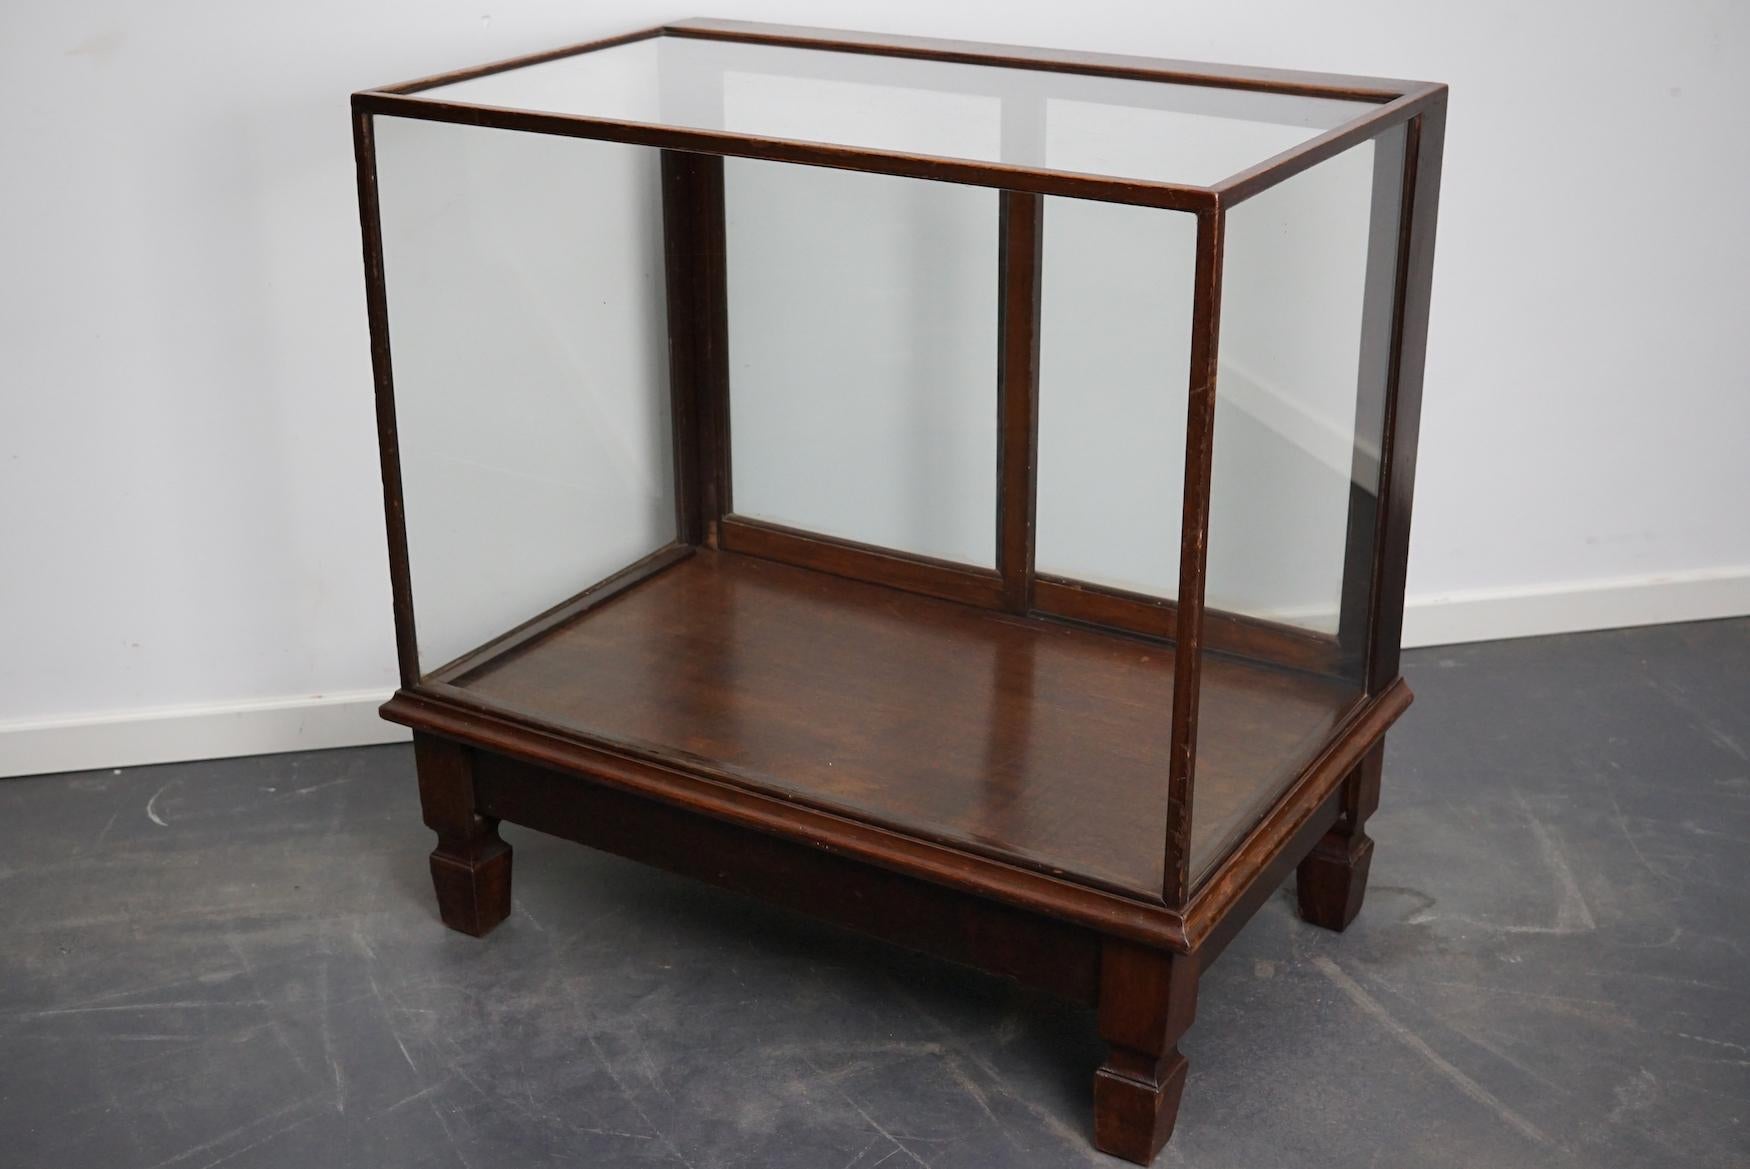 Mahogany Museum / Shop Display Cabinet or Vitrine, Early 20th Century For Sale 5